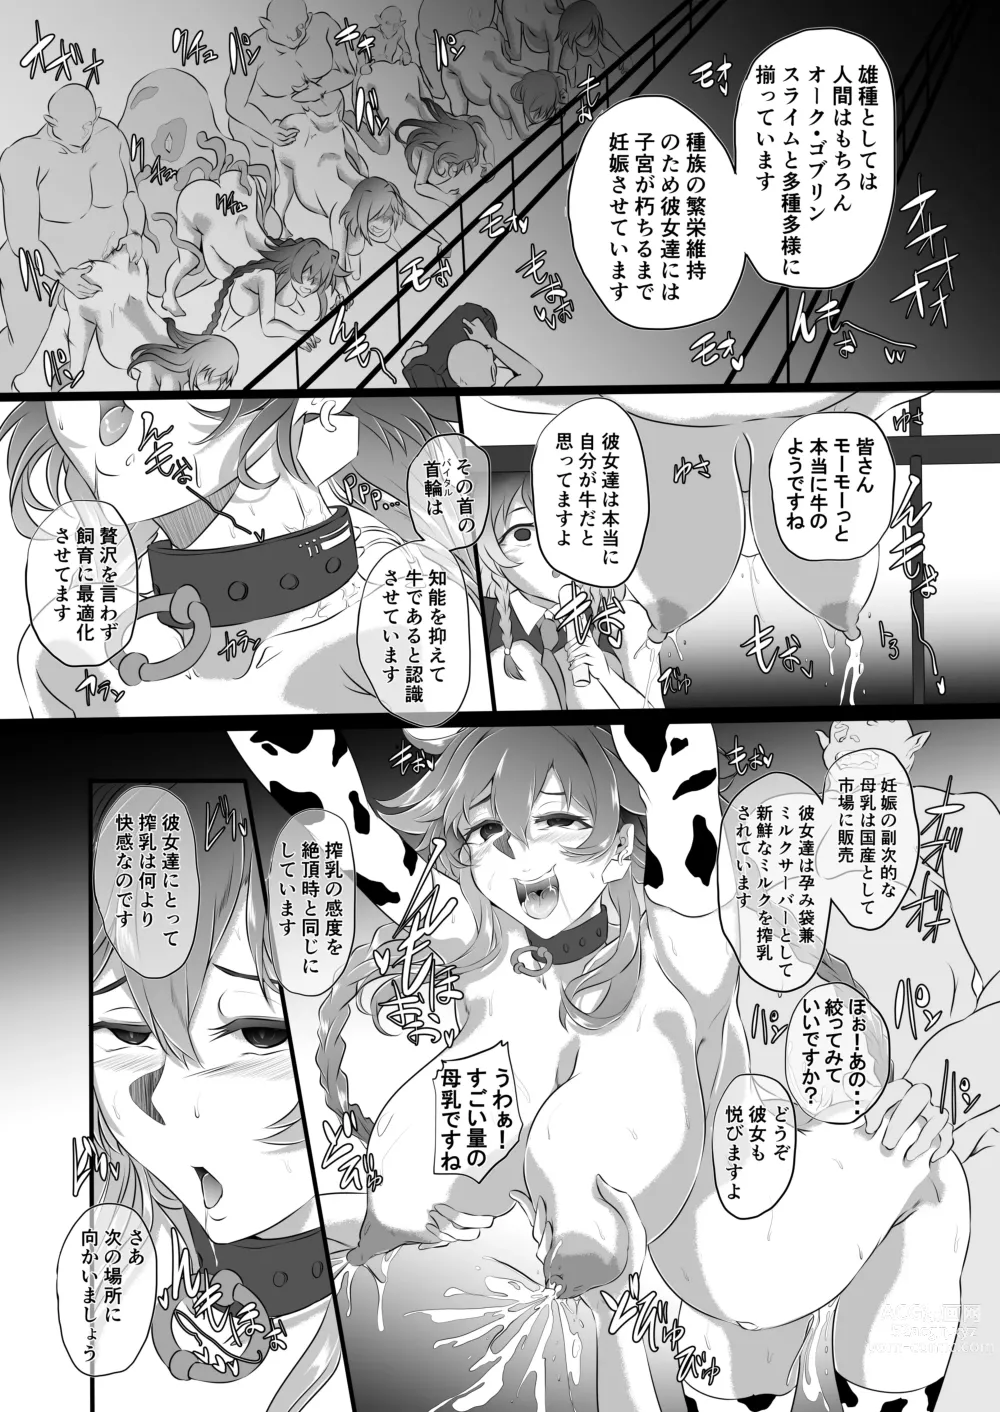 Page 188 of doujinshi CollapsedWorld Another√chaos Summary